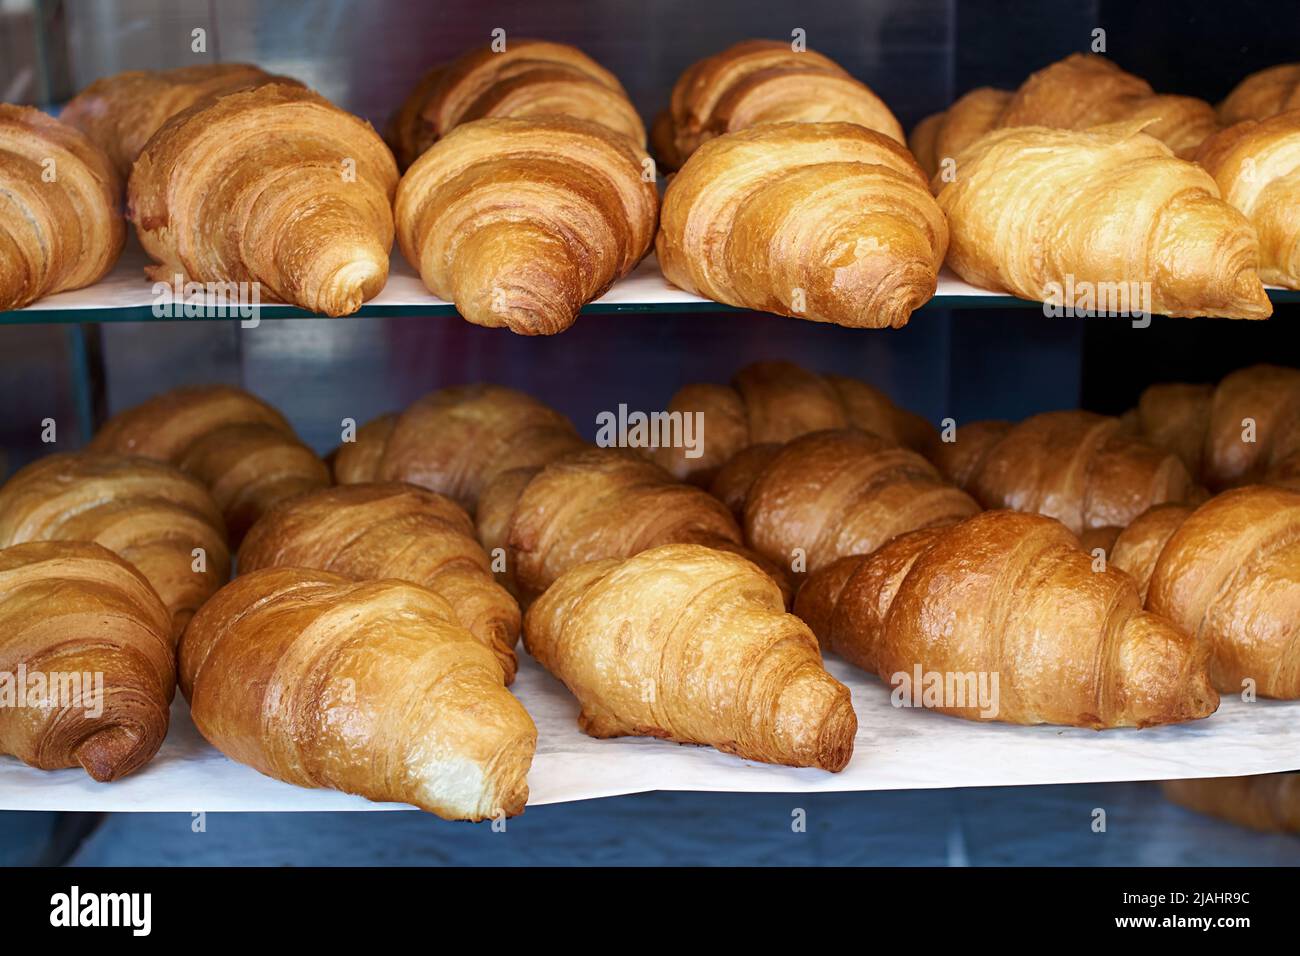 Lots of fresh french croissants on the store shelf Stock Photo